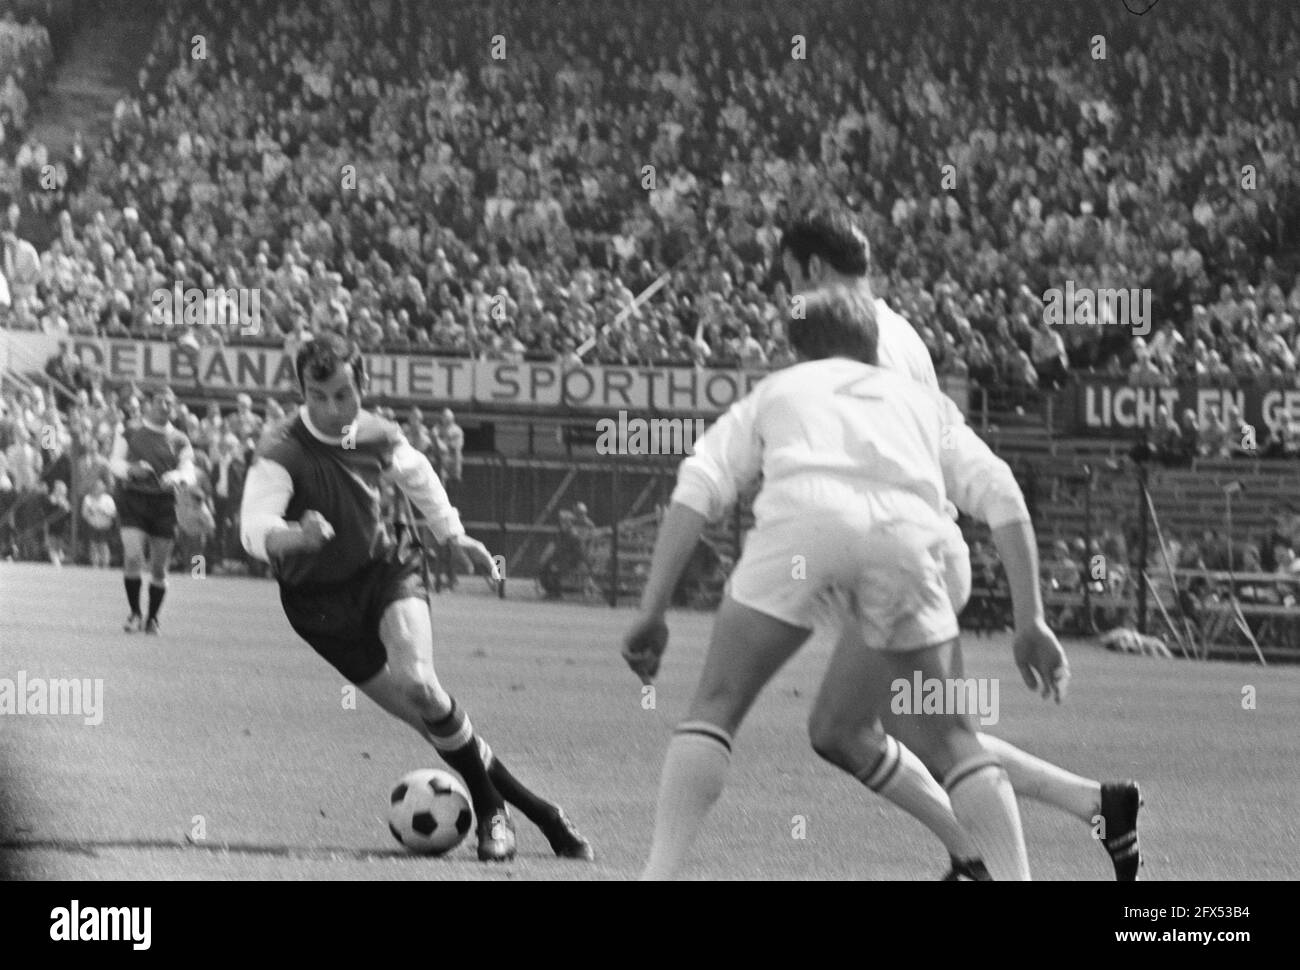 Feijenoord v Telstar 4-1. Coen Moulijn in action, may 18, 1969, sports, soccer, The Netherlands, 20th century press agency photo, news to remember, documentary, historic photography 1945-1990, visual stories, human history of the Twentieth Century, capturing moments in time Stock Photo